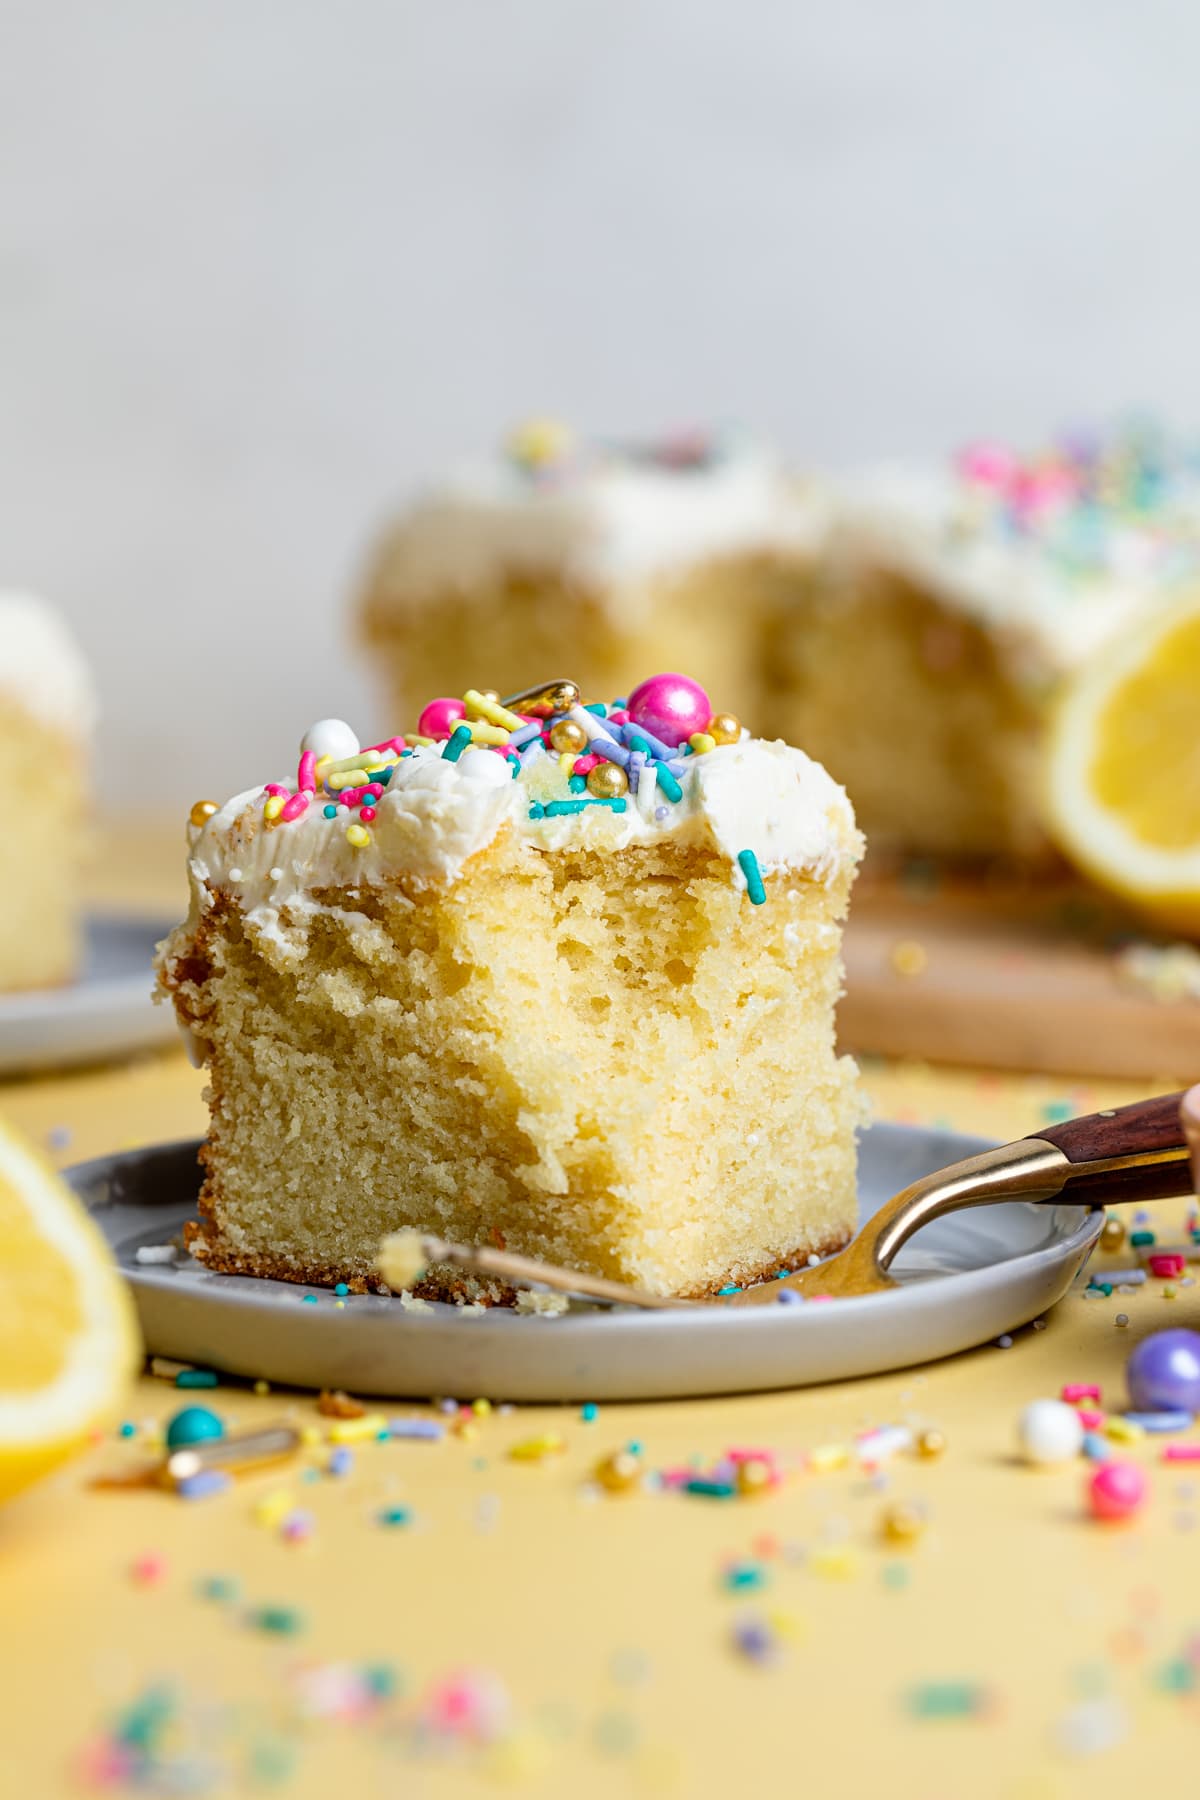 Slice of cake on a white plate with fork and lemons and sprinkles.